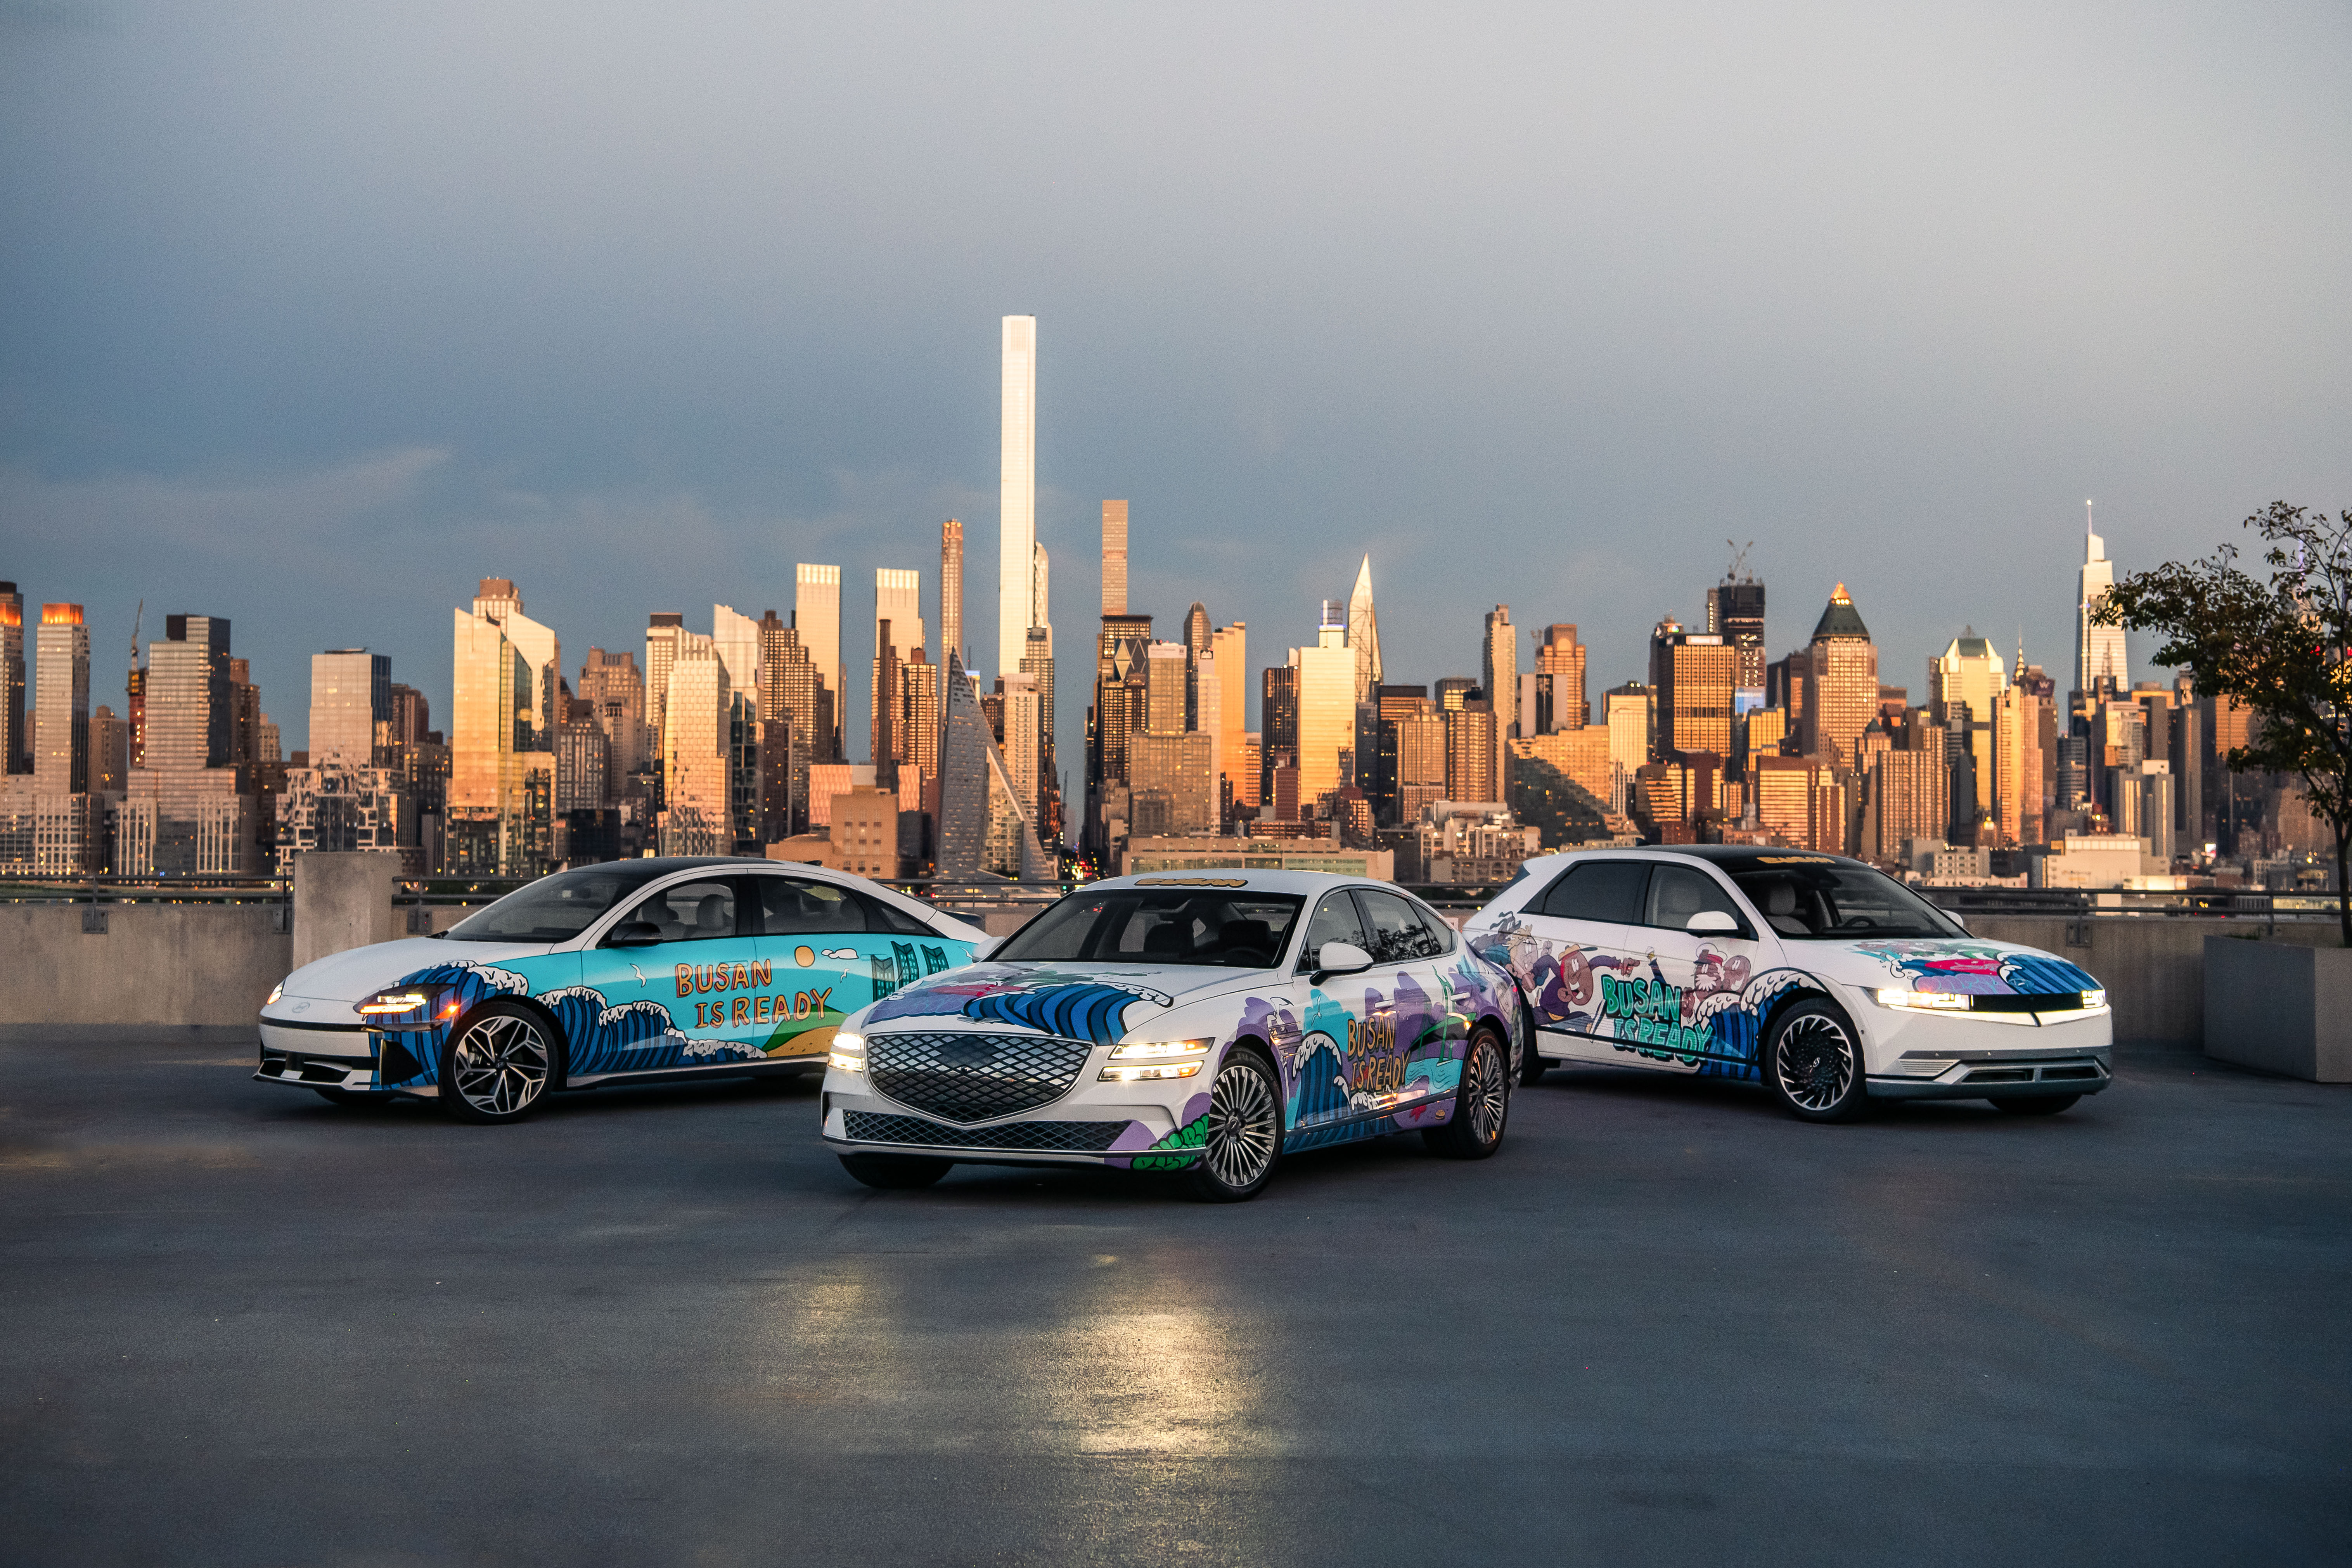 Hyundai Motor Group Showcases Art Cars in New York City Supporting Busan’s Bid for the 2030 World Expo